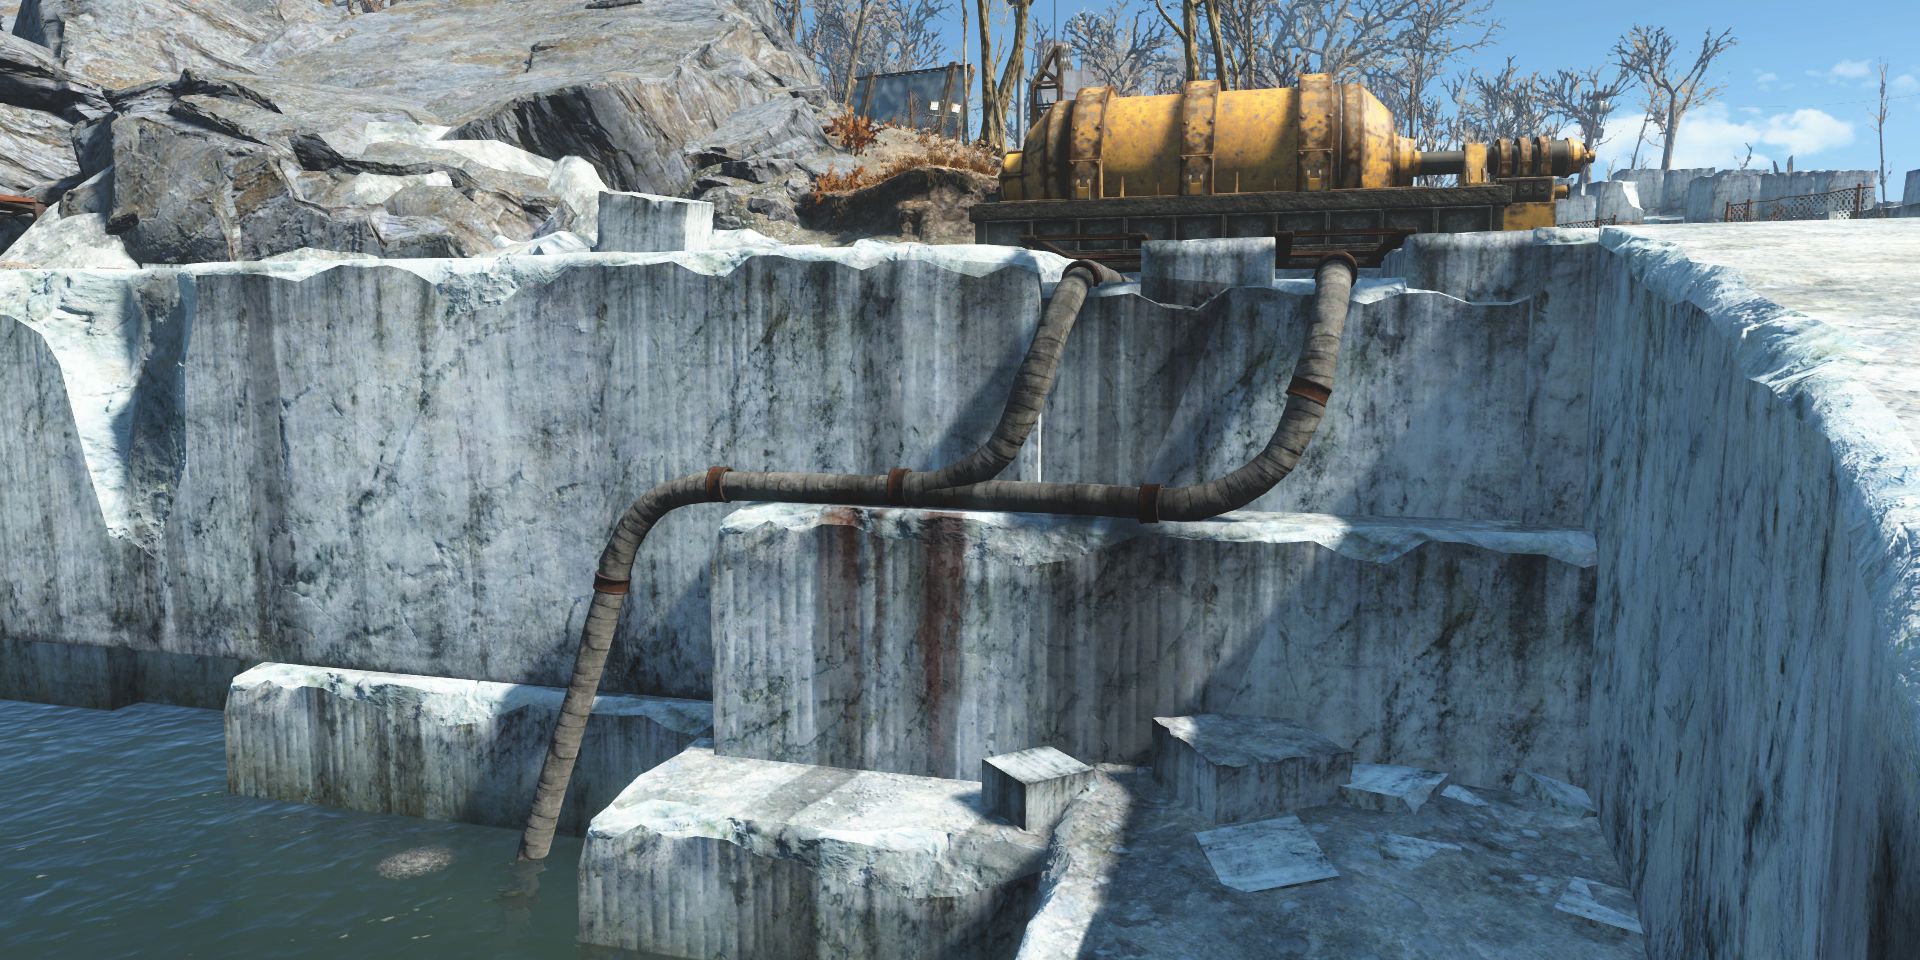 A pool of contaminated water in Fallout 4